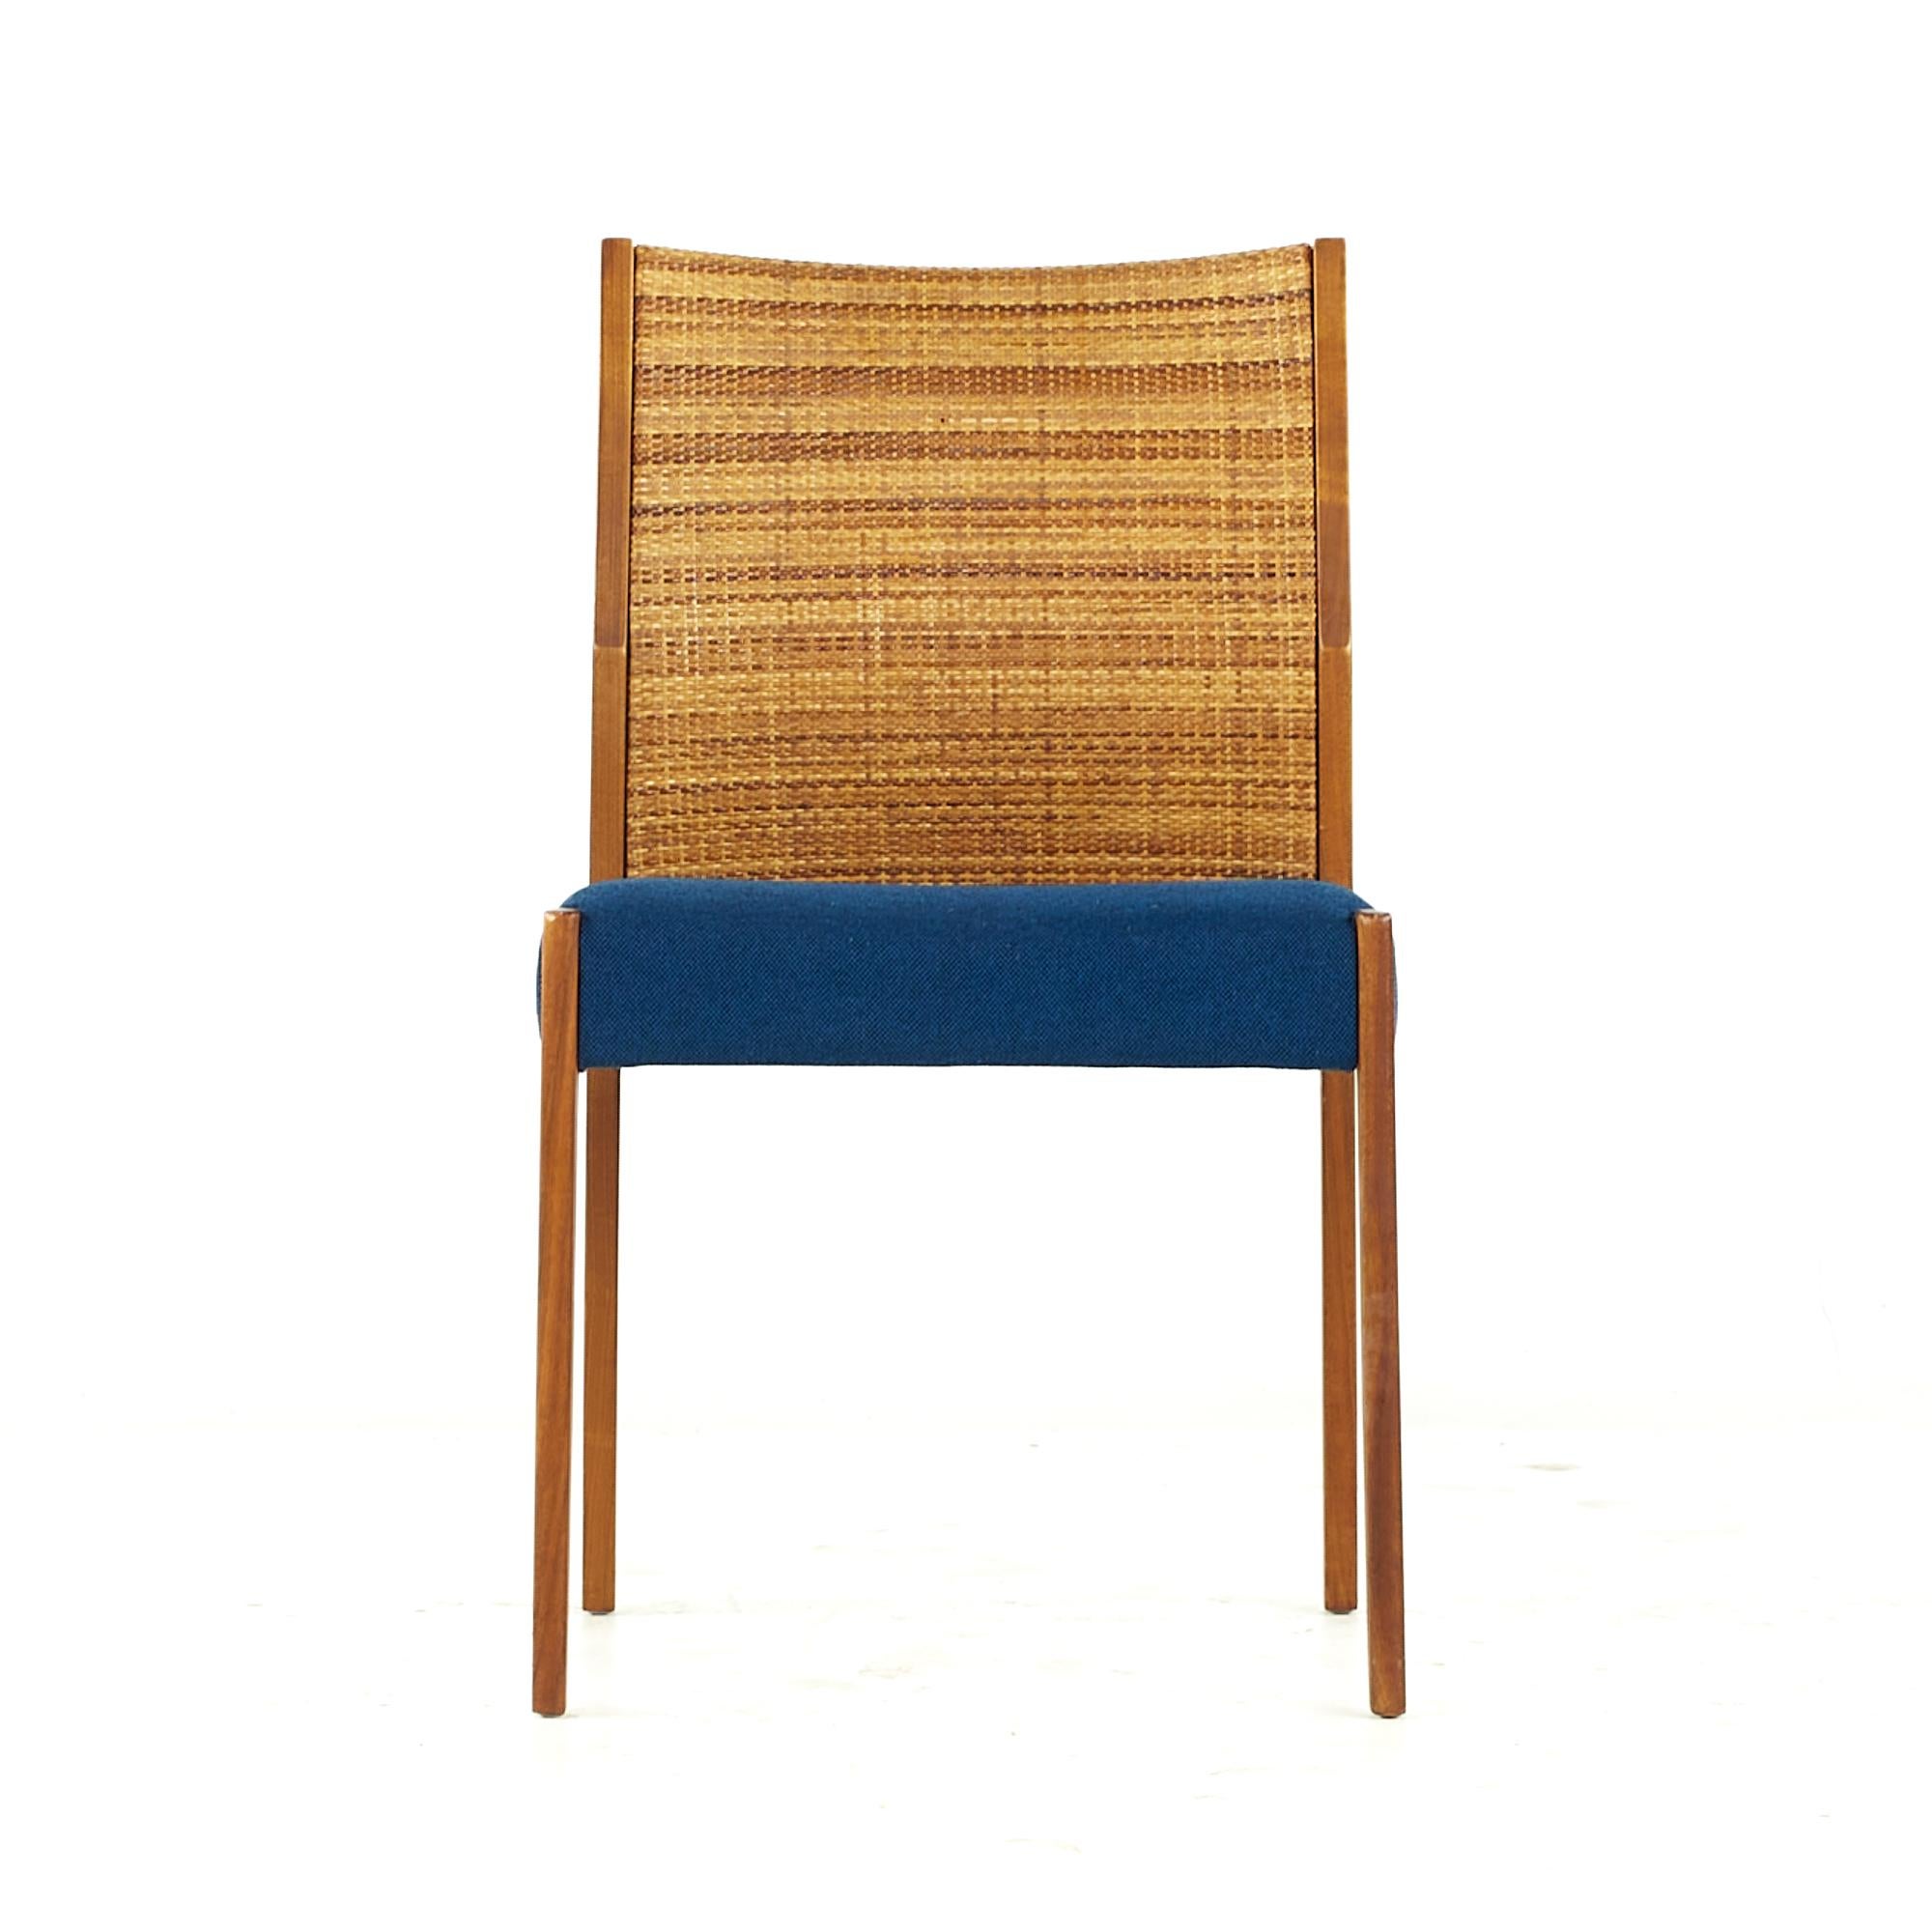 Jens Risom Mid Century Cane and Walnut Dining Chairs - Set of 6 Bon état - En vente à Countryside, IL